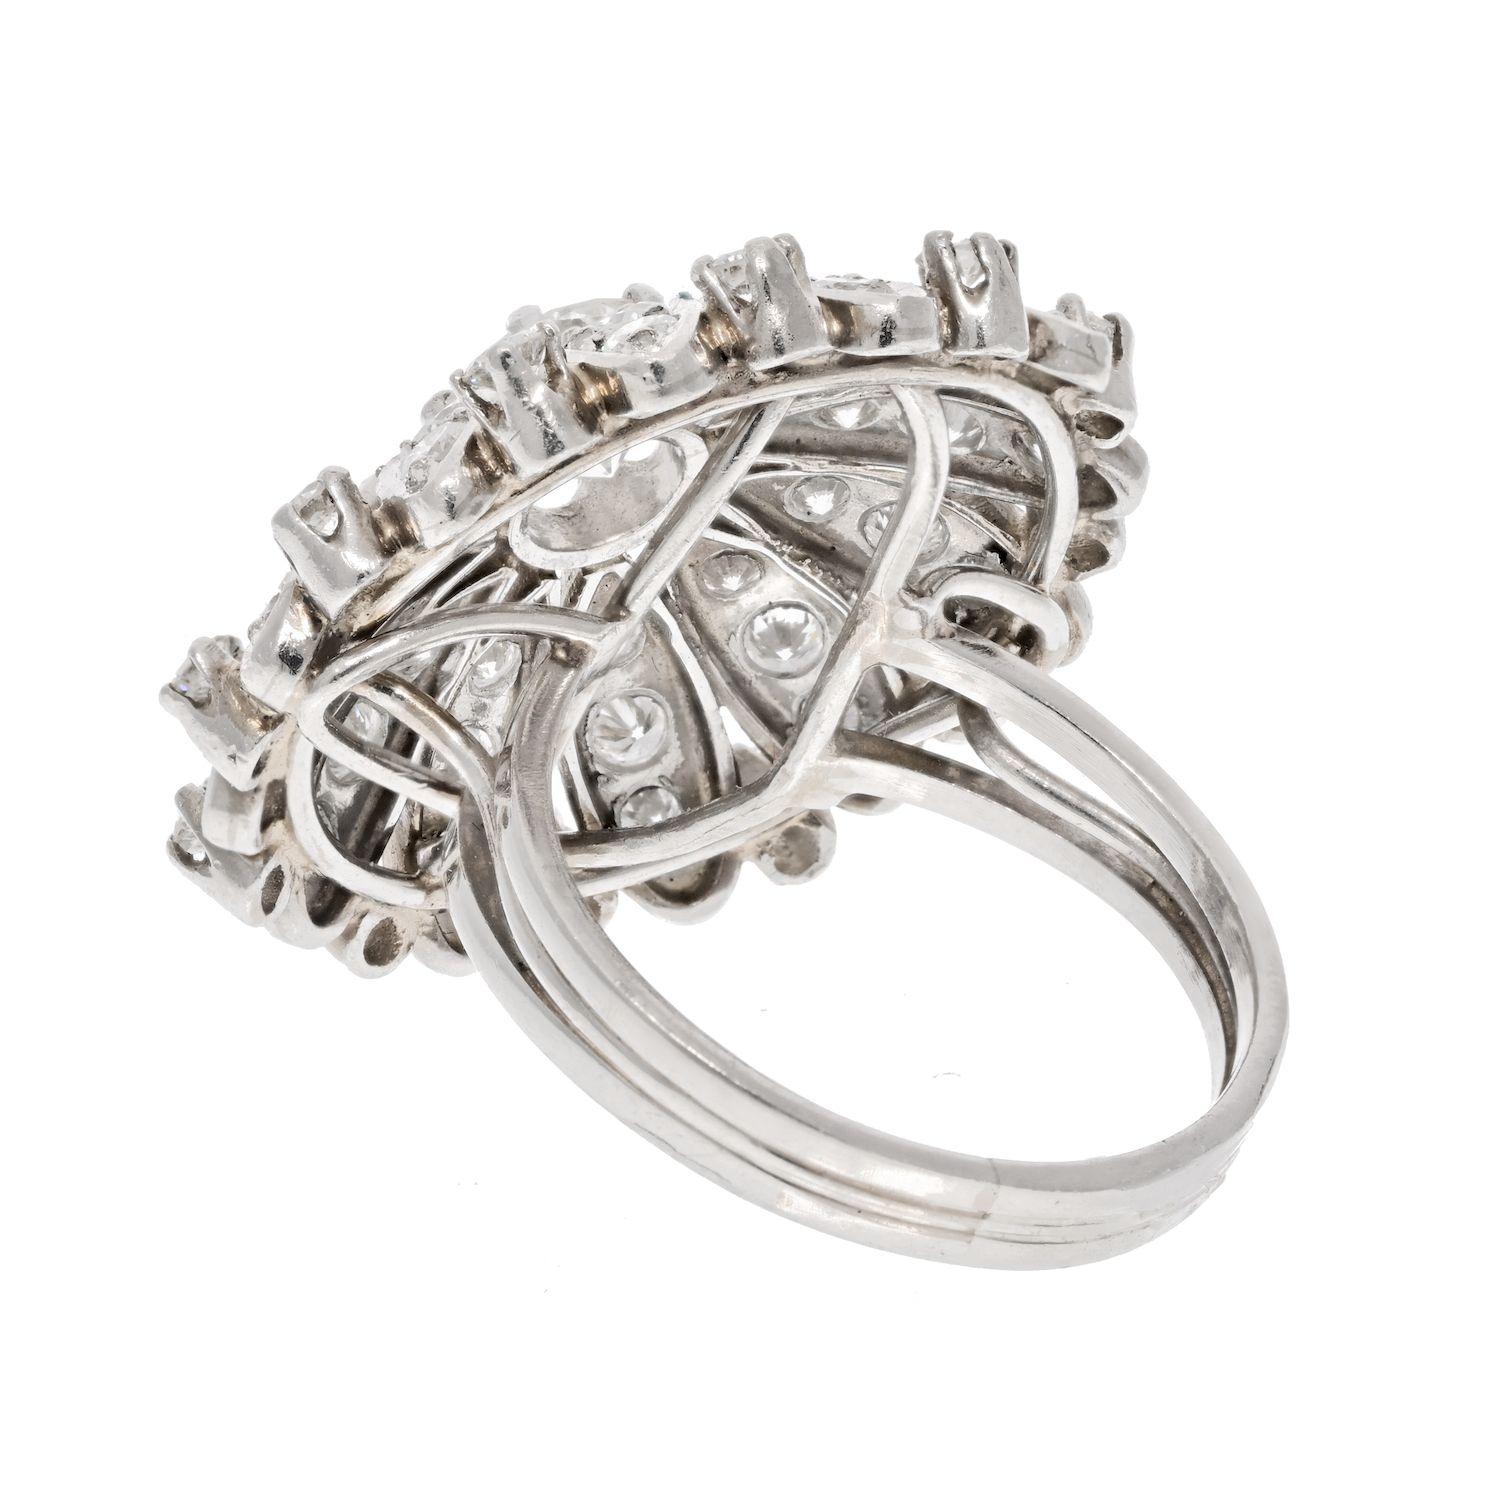 When shopping for a vintage ring, one that truly encapsulates the elegance and significance of a bygone era is the Platinum 3.54cttw Diamond Flower Motif Ring from the 1940s. This period in jewelry design holds particular charm and importance,